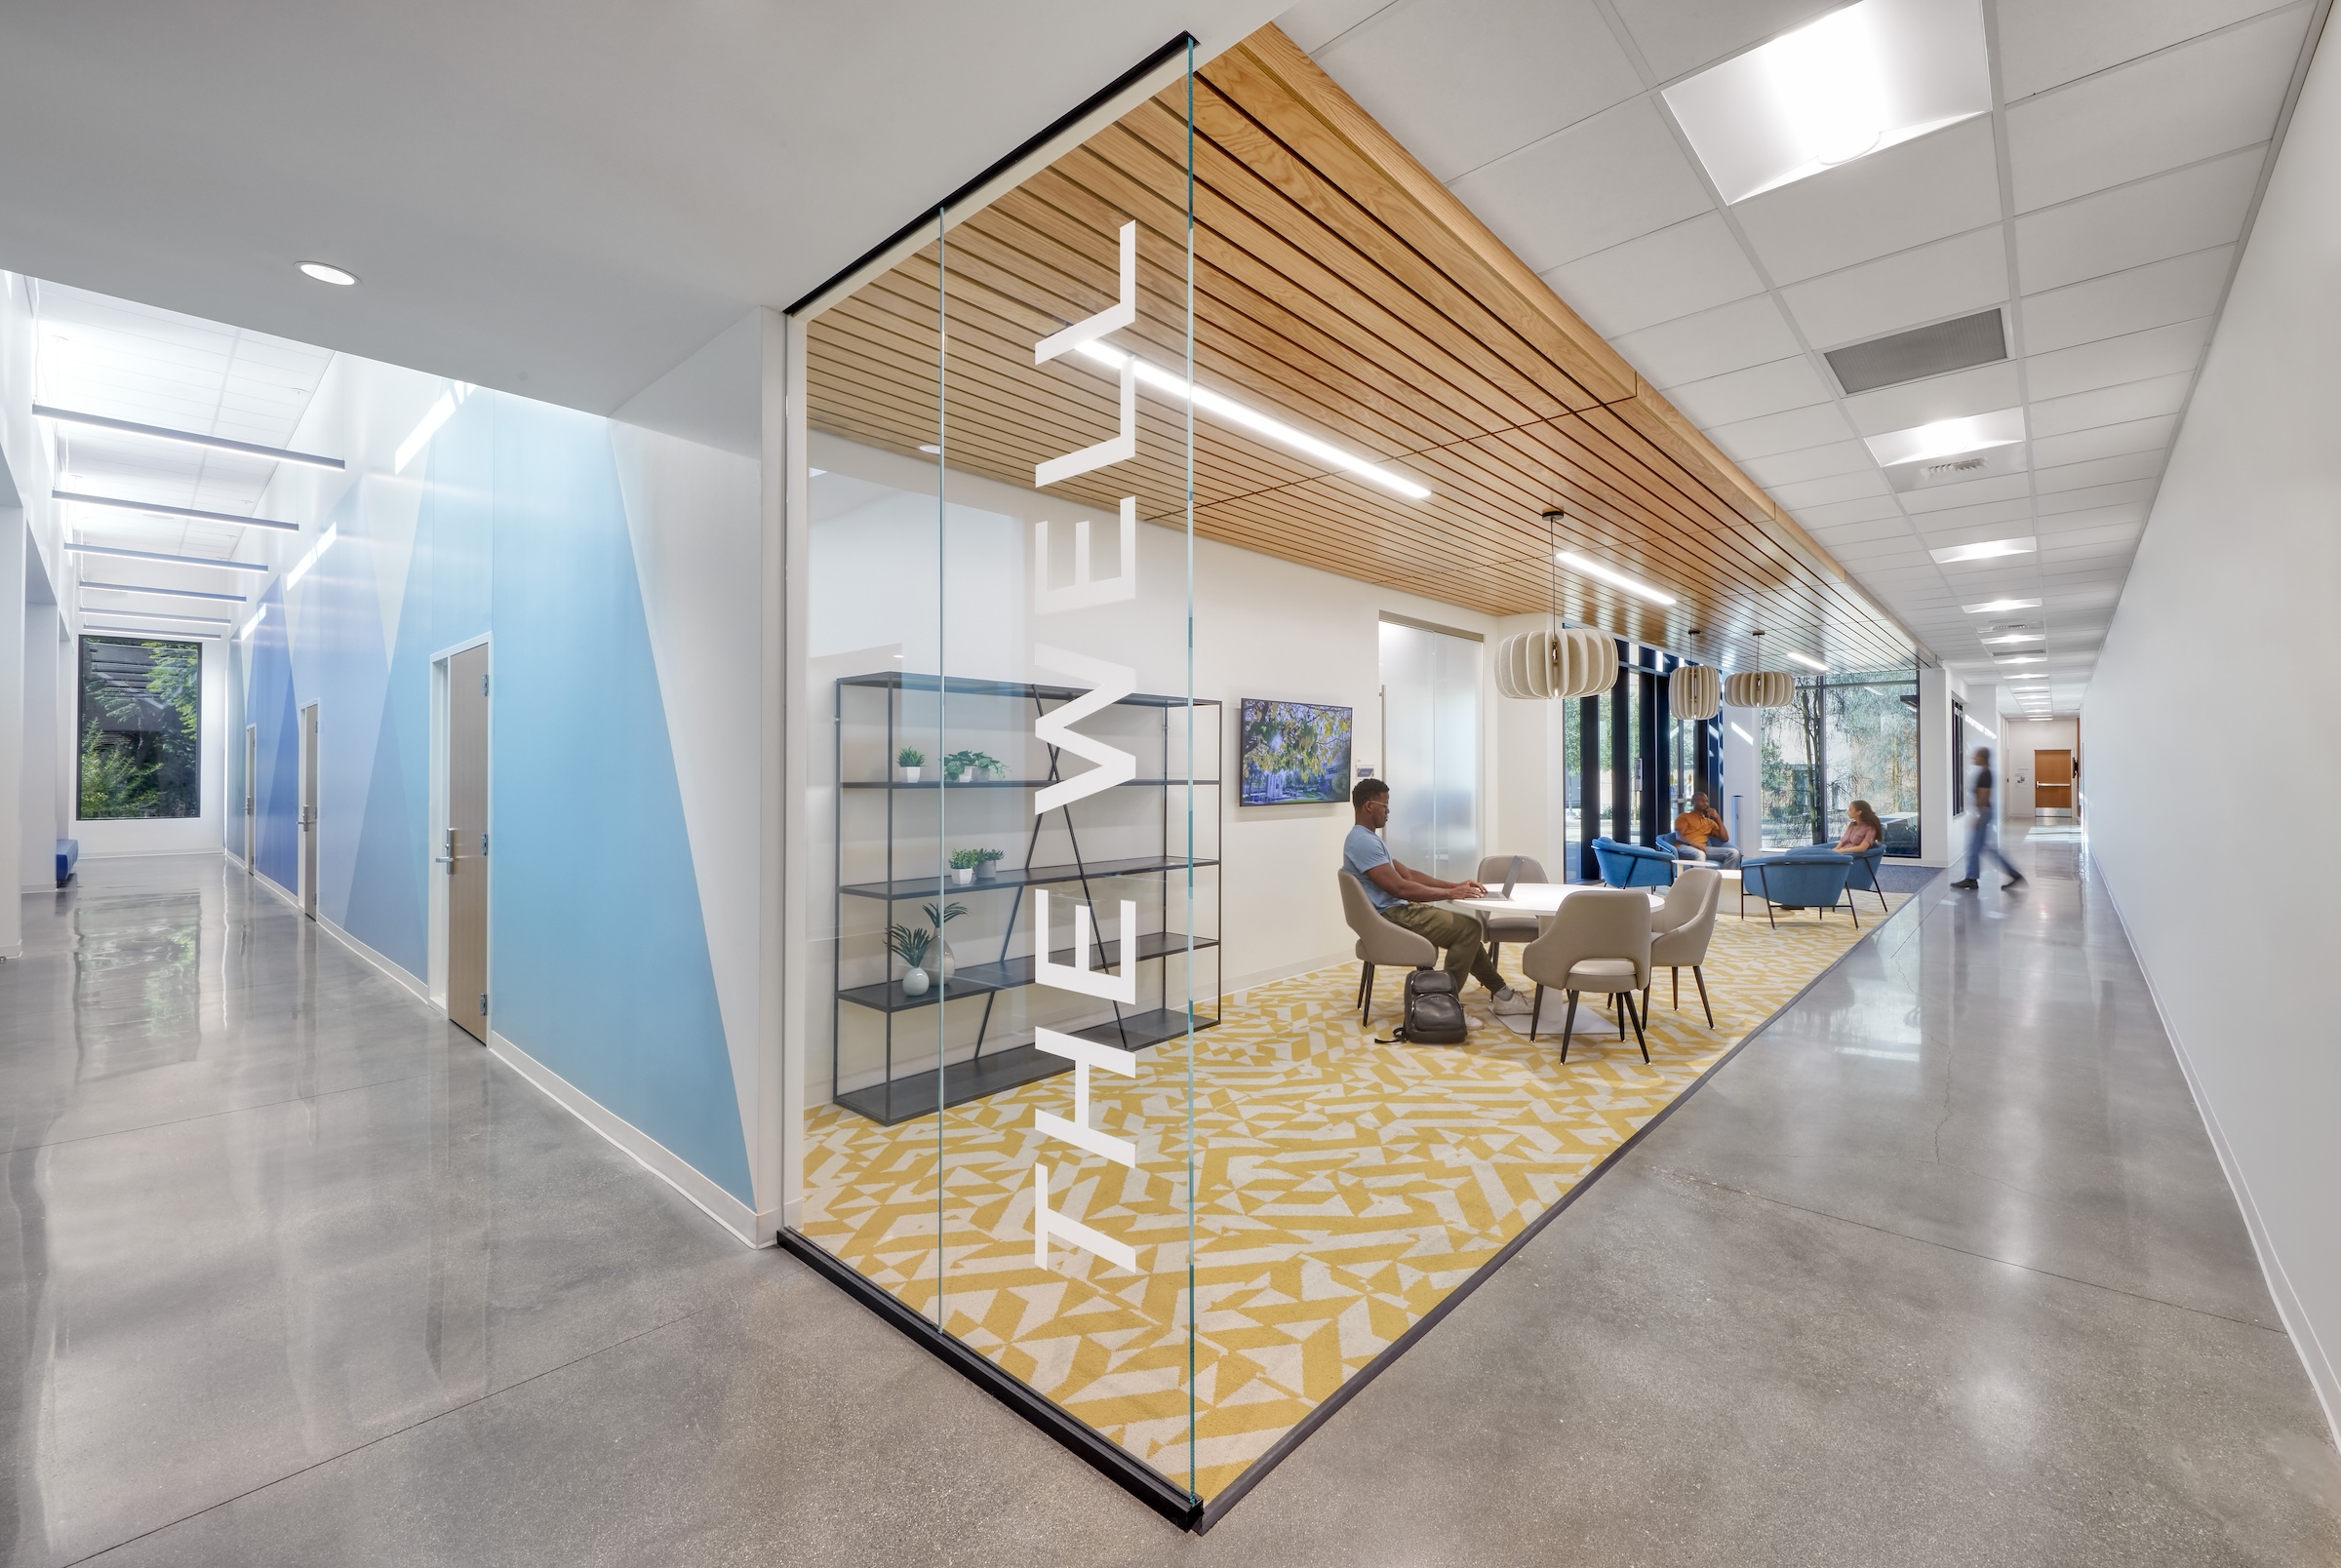 UC Riverside’s Student Health and Counseling Center provides an environment on par with major medical centers Photo courtesy HGA